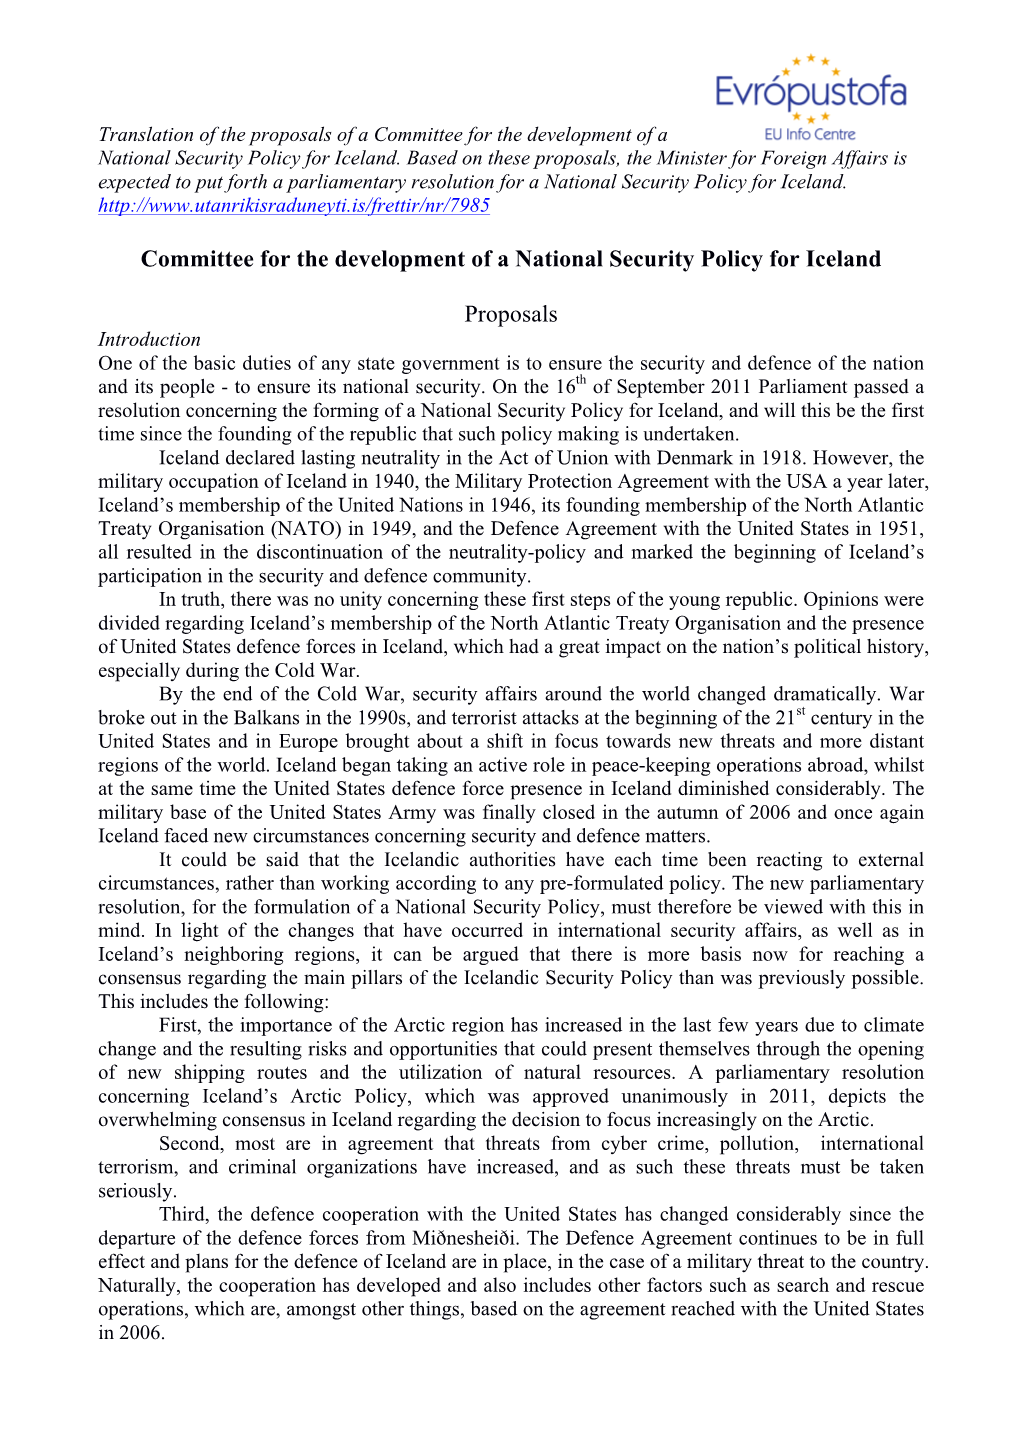 Committee for the Development of a National Security Policy for Iceland